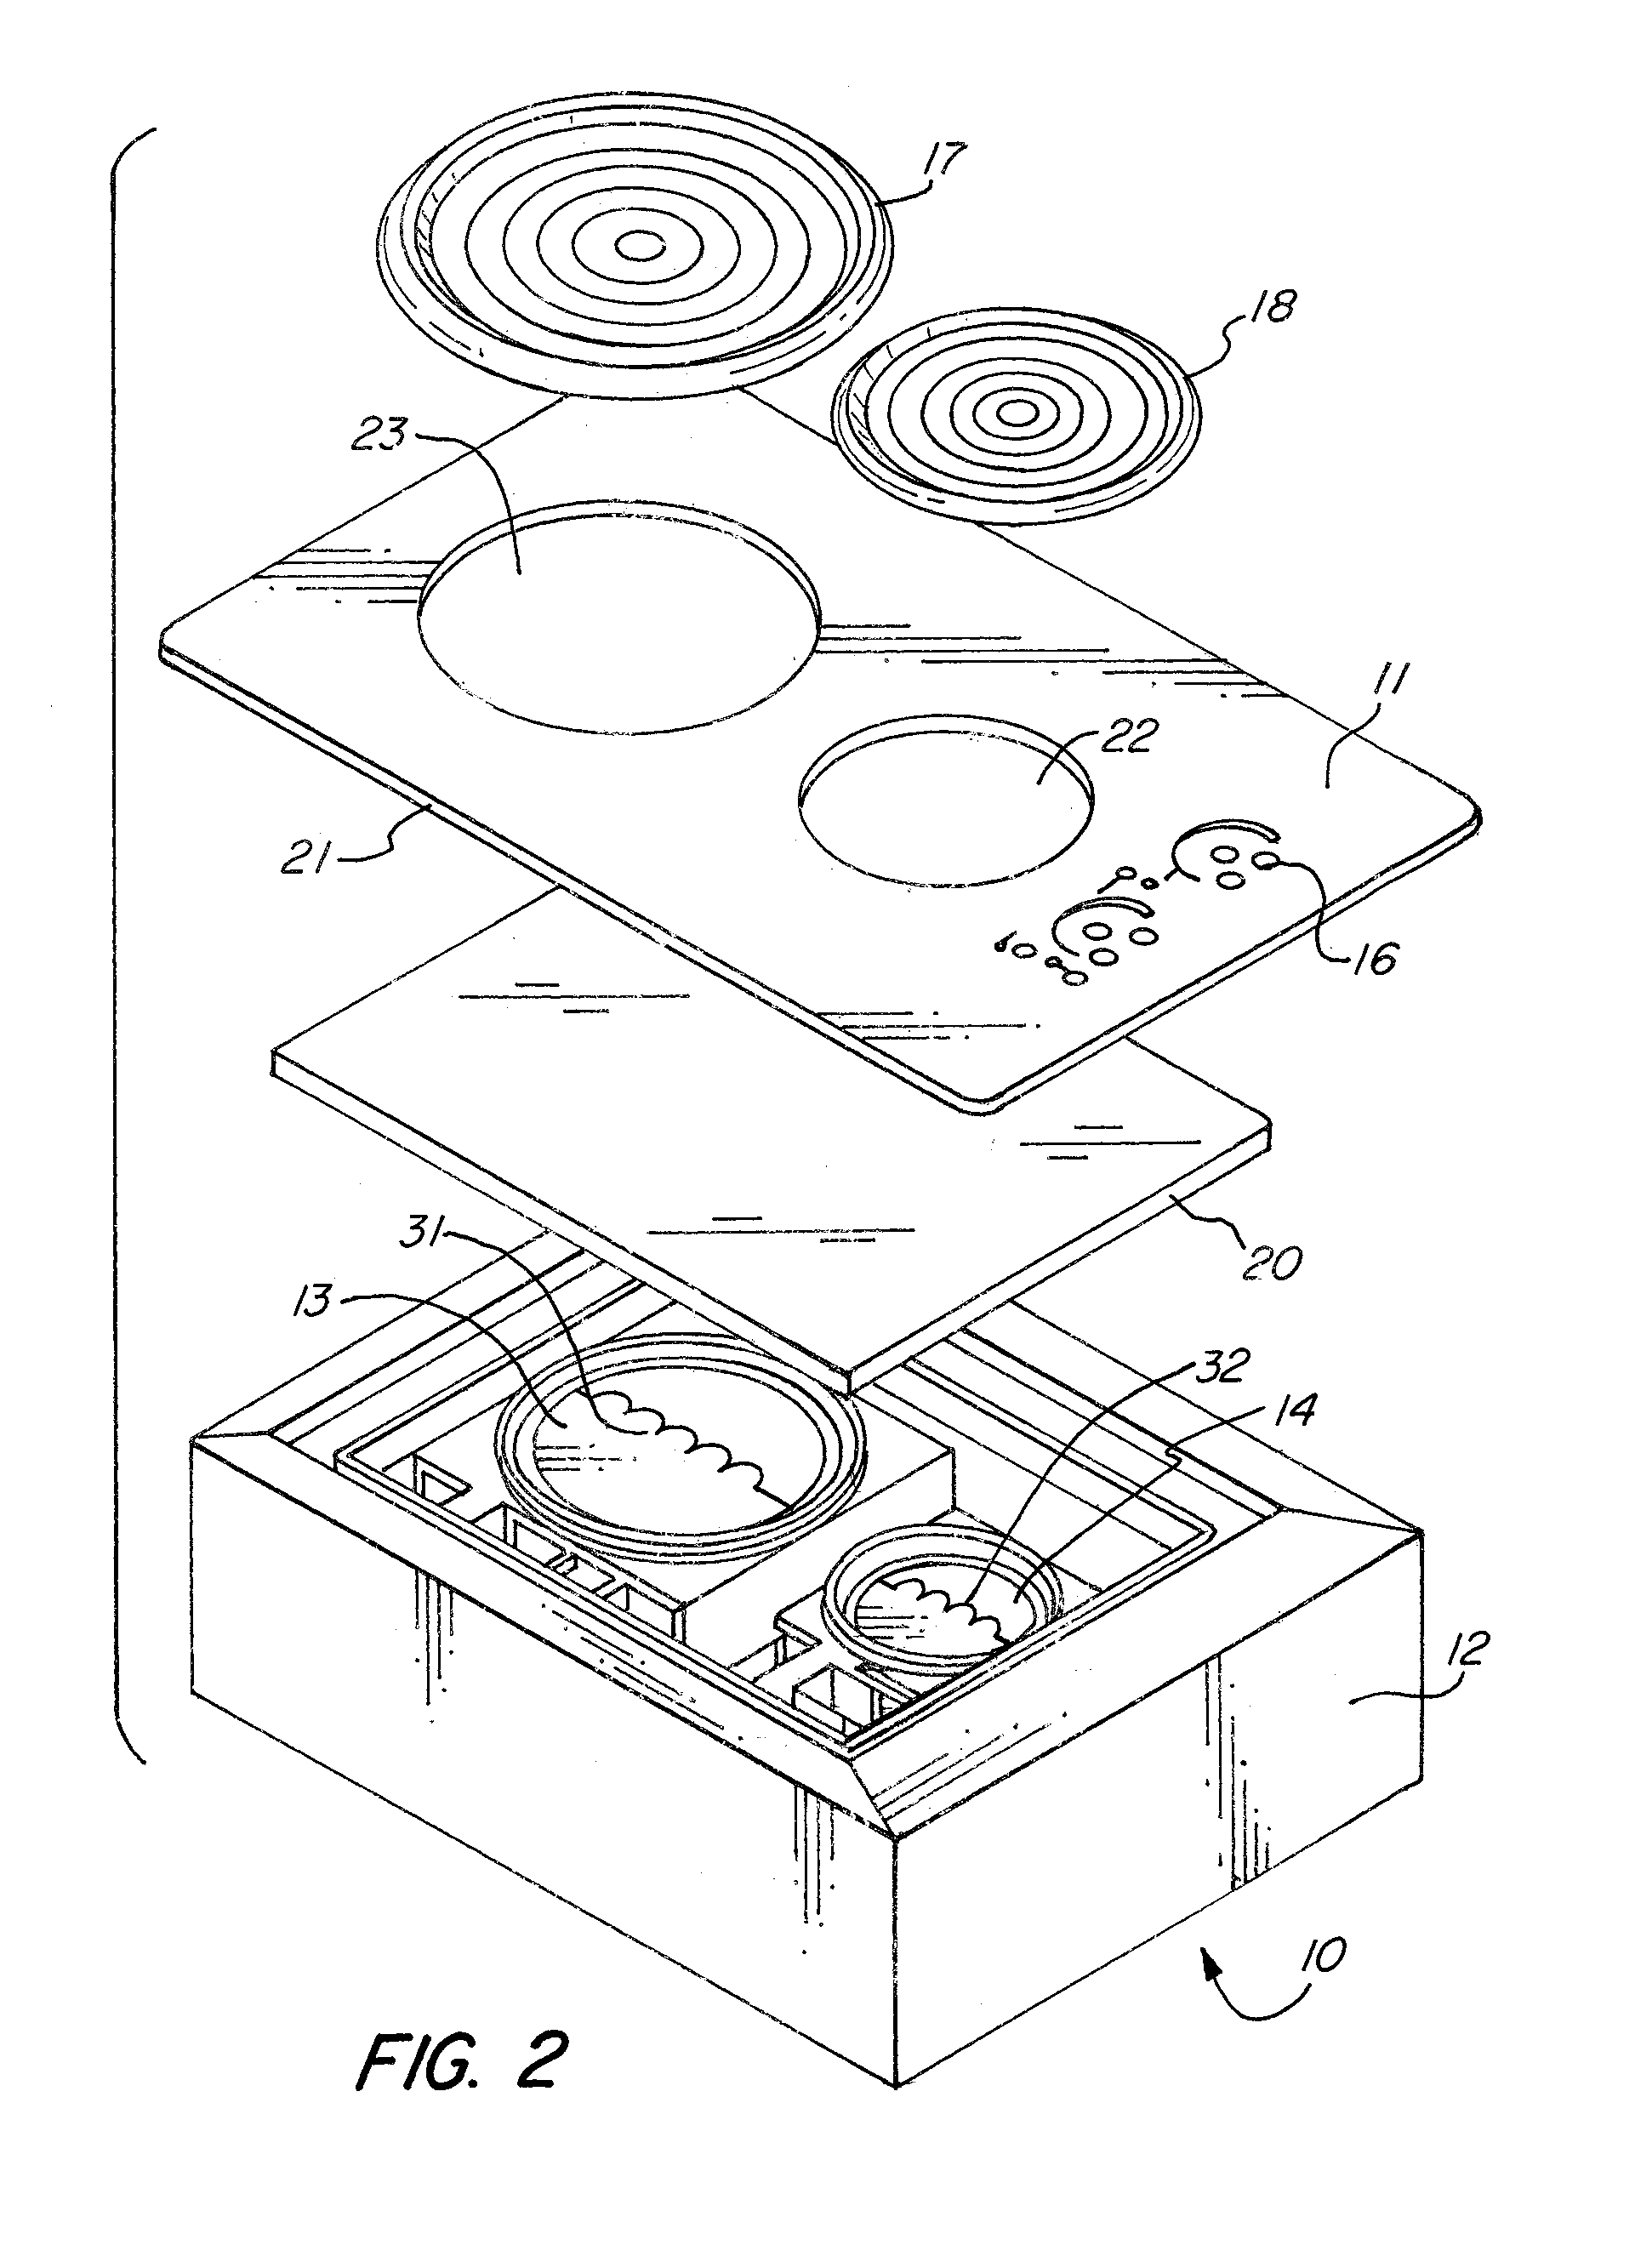 Induction cook-top apparatus